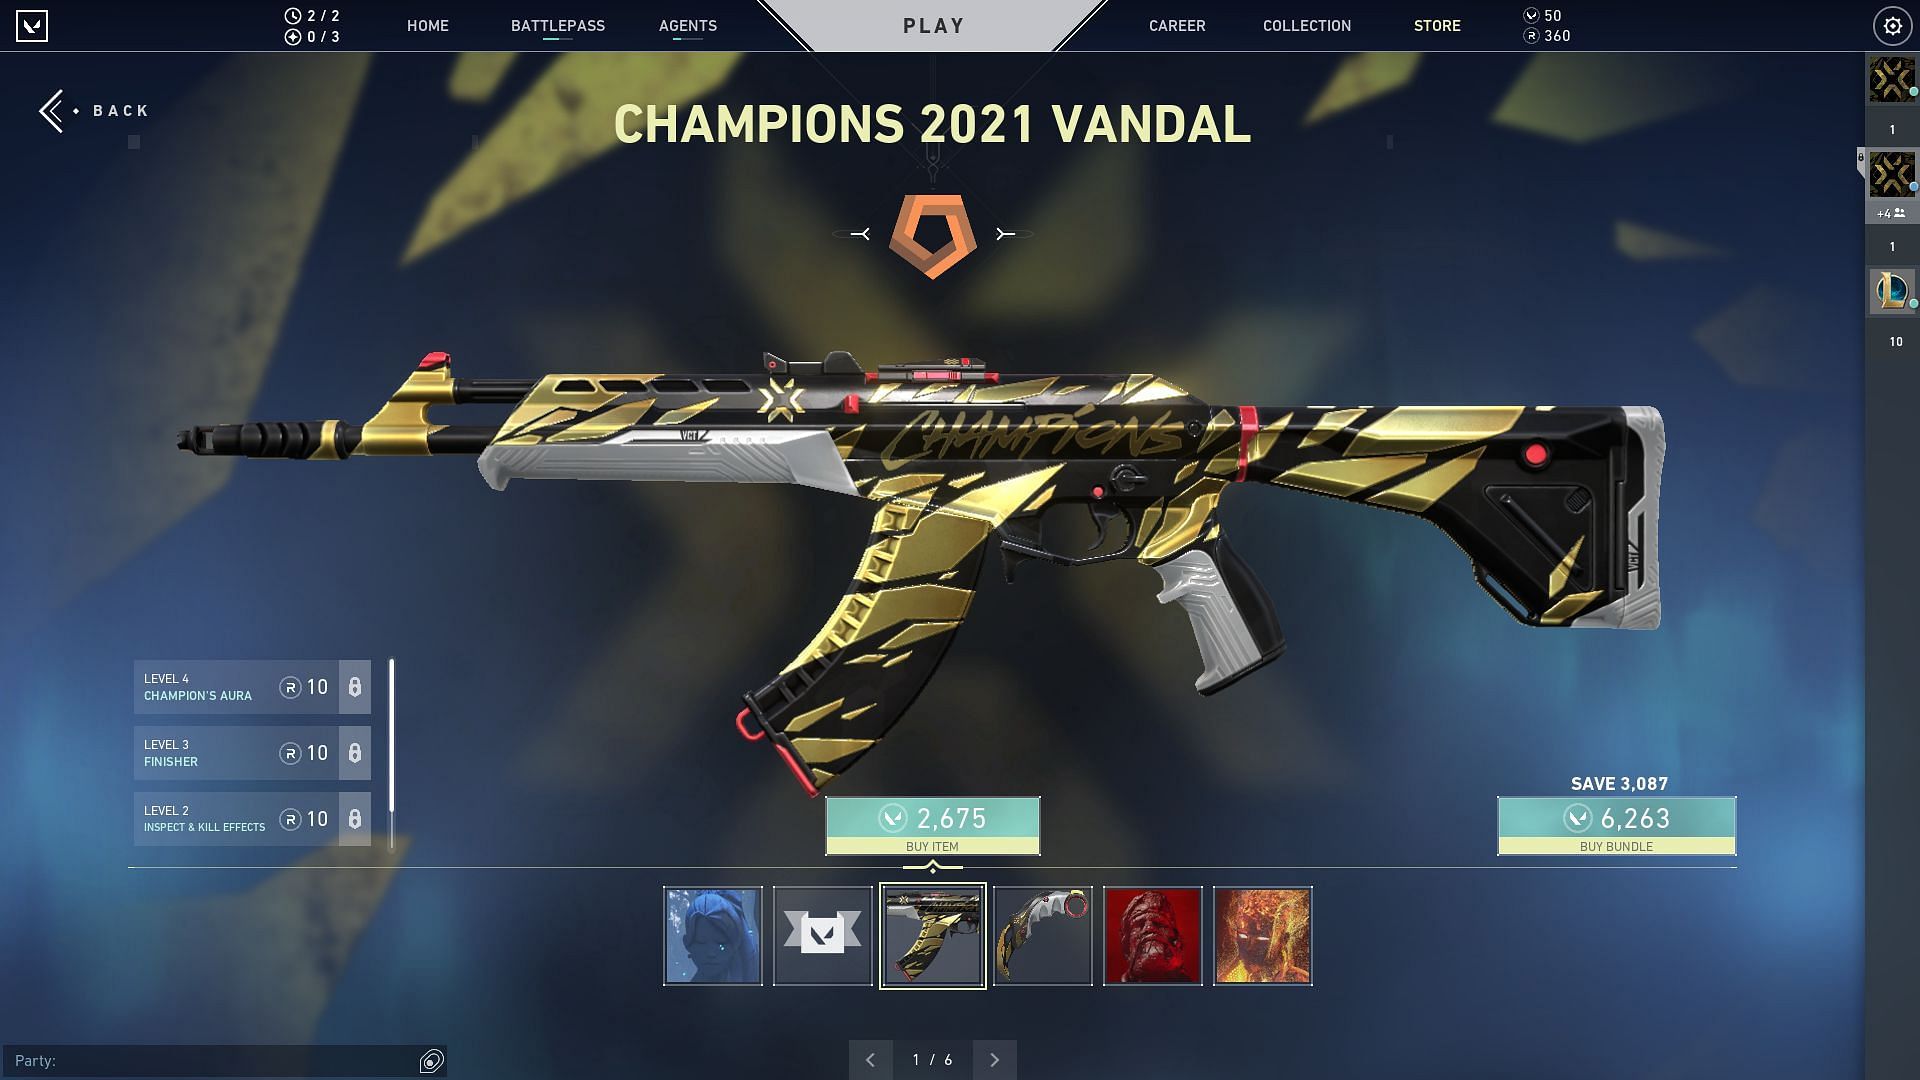 The Valorant community is not happy with the exclusive Champions 2021